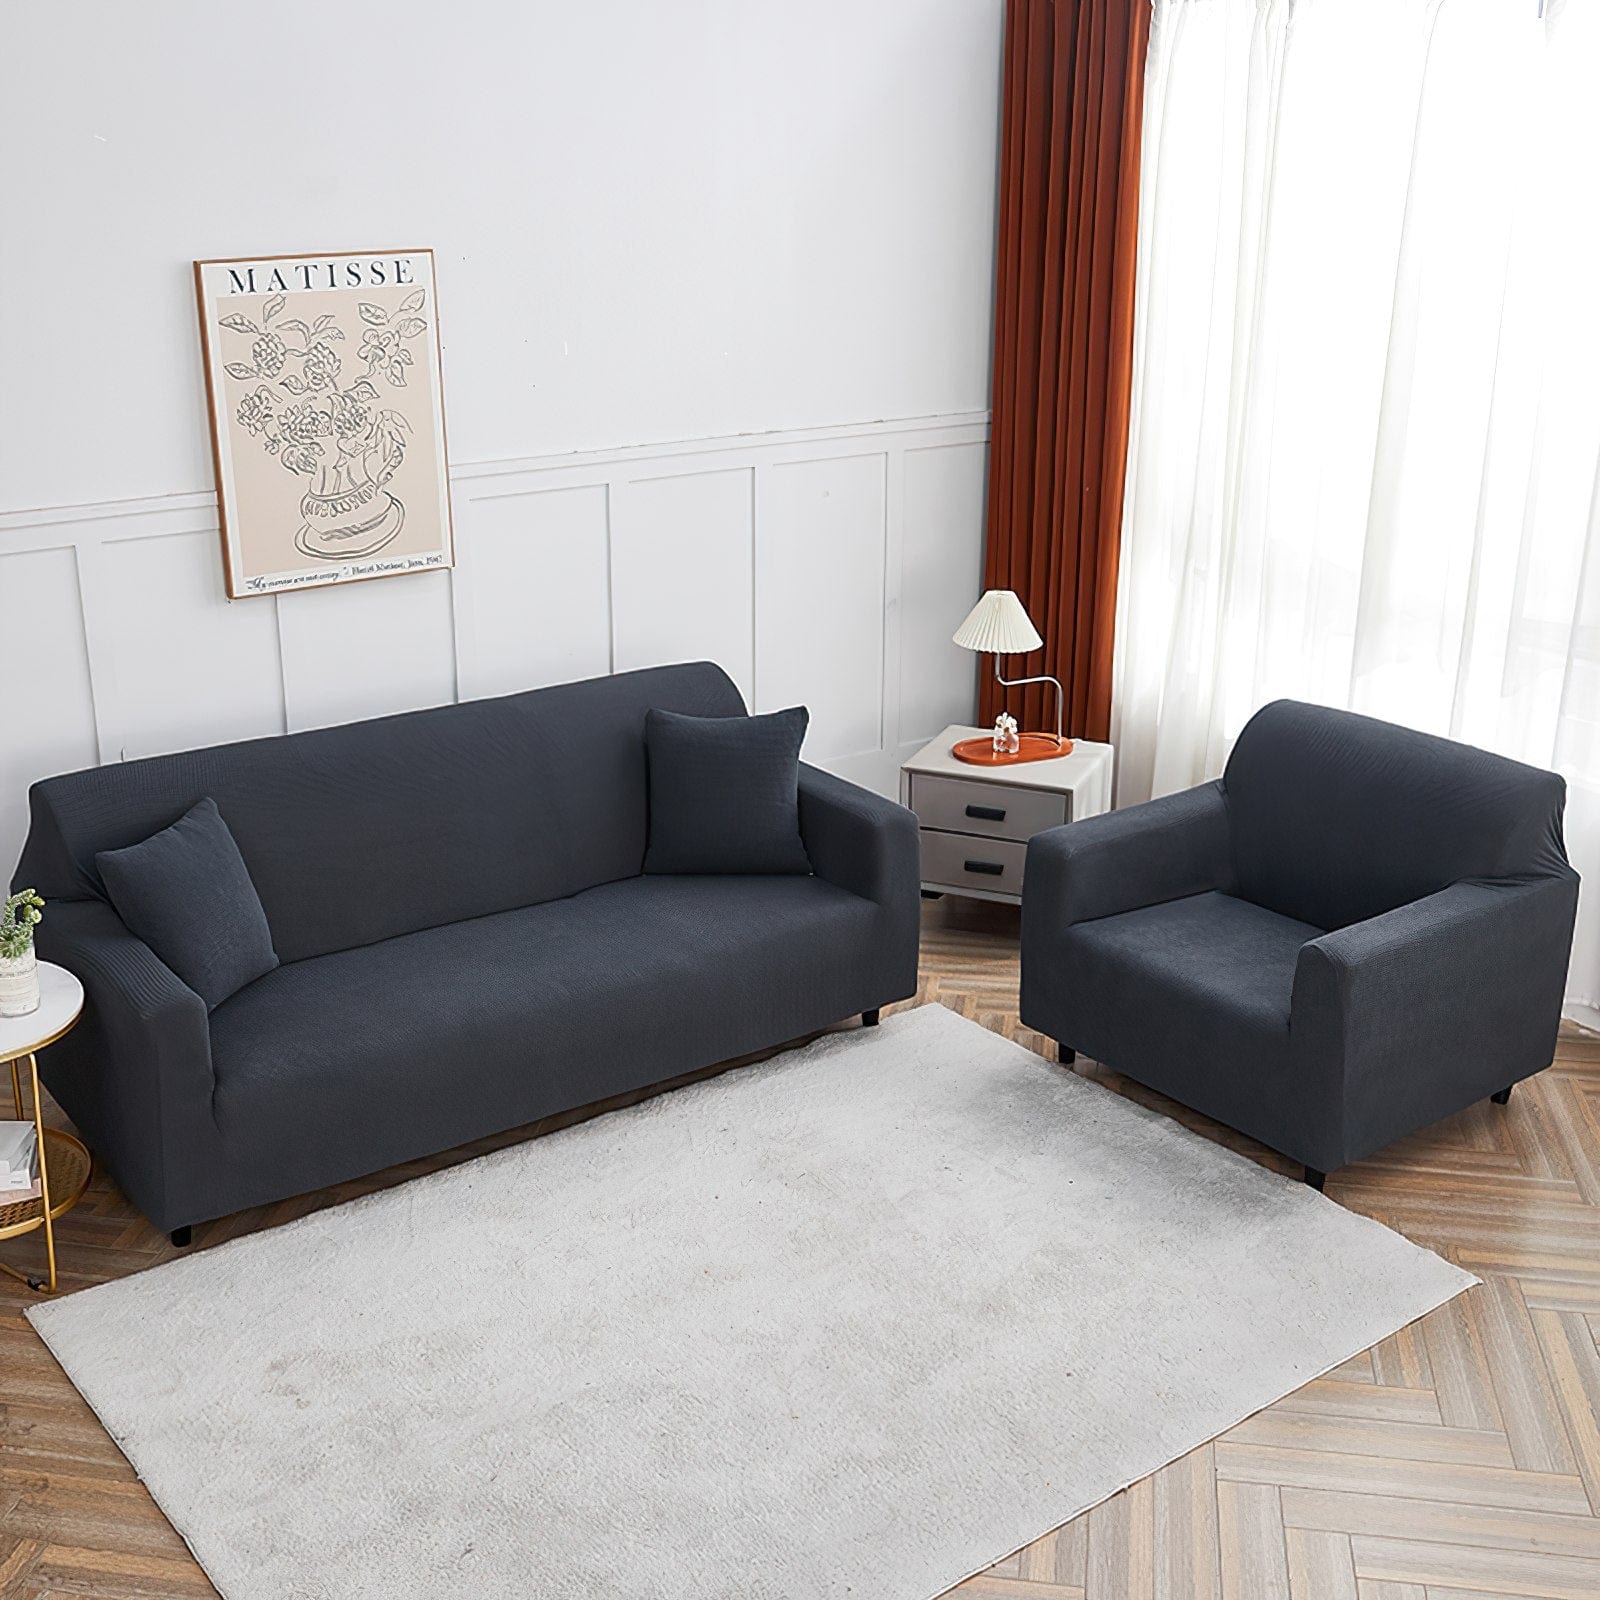 Grey - 100% Waterproof and Ultra Resistant Stretch Armchair and Sofa Covers - The Sofa Cover House